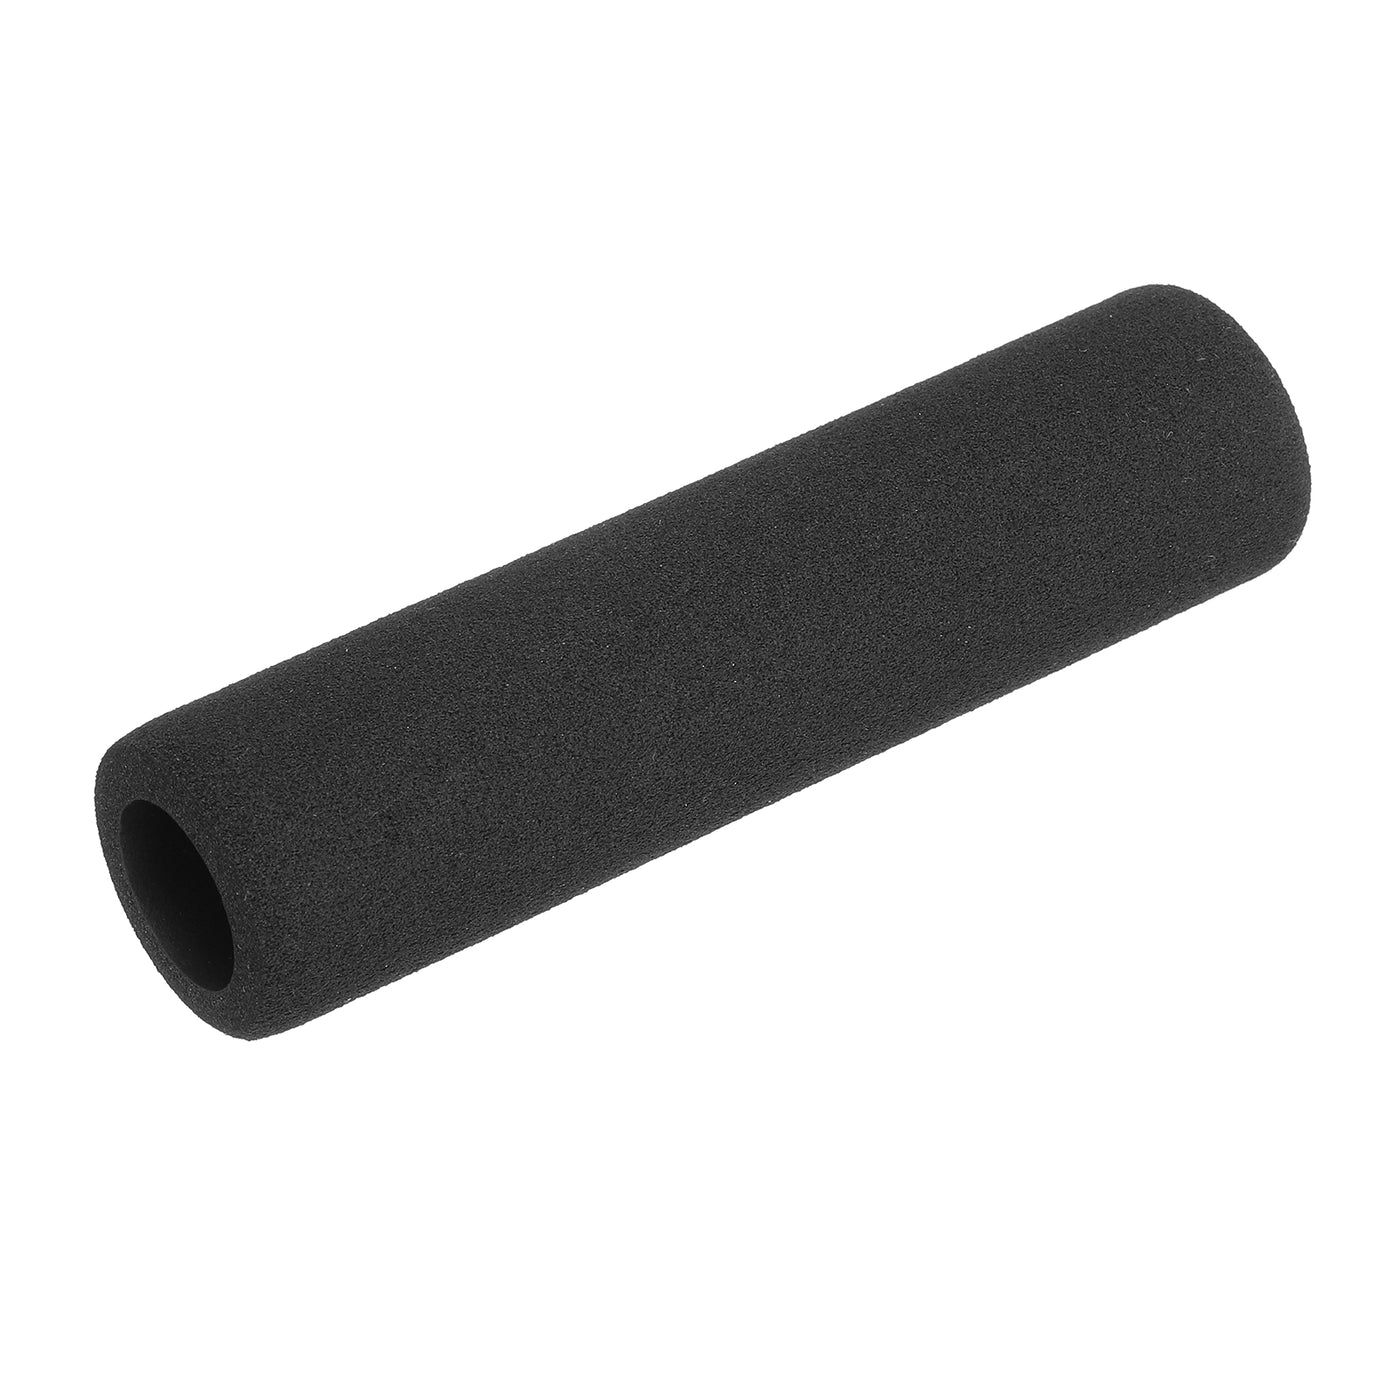 uxcell Uxcell Pipe Insulation Tube Foam Tubing for Handle Grip Support 18mm ID 28mm OD 116mm Heat Preservation Black